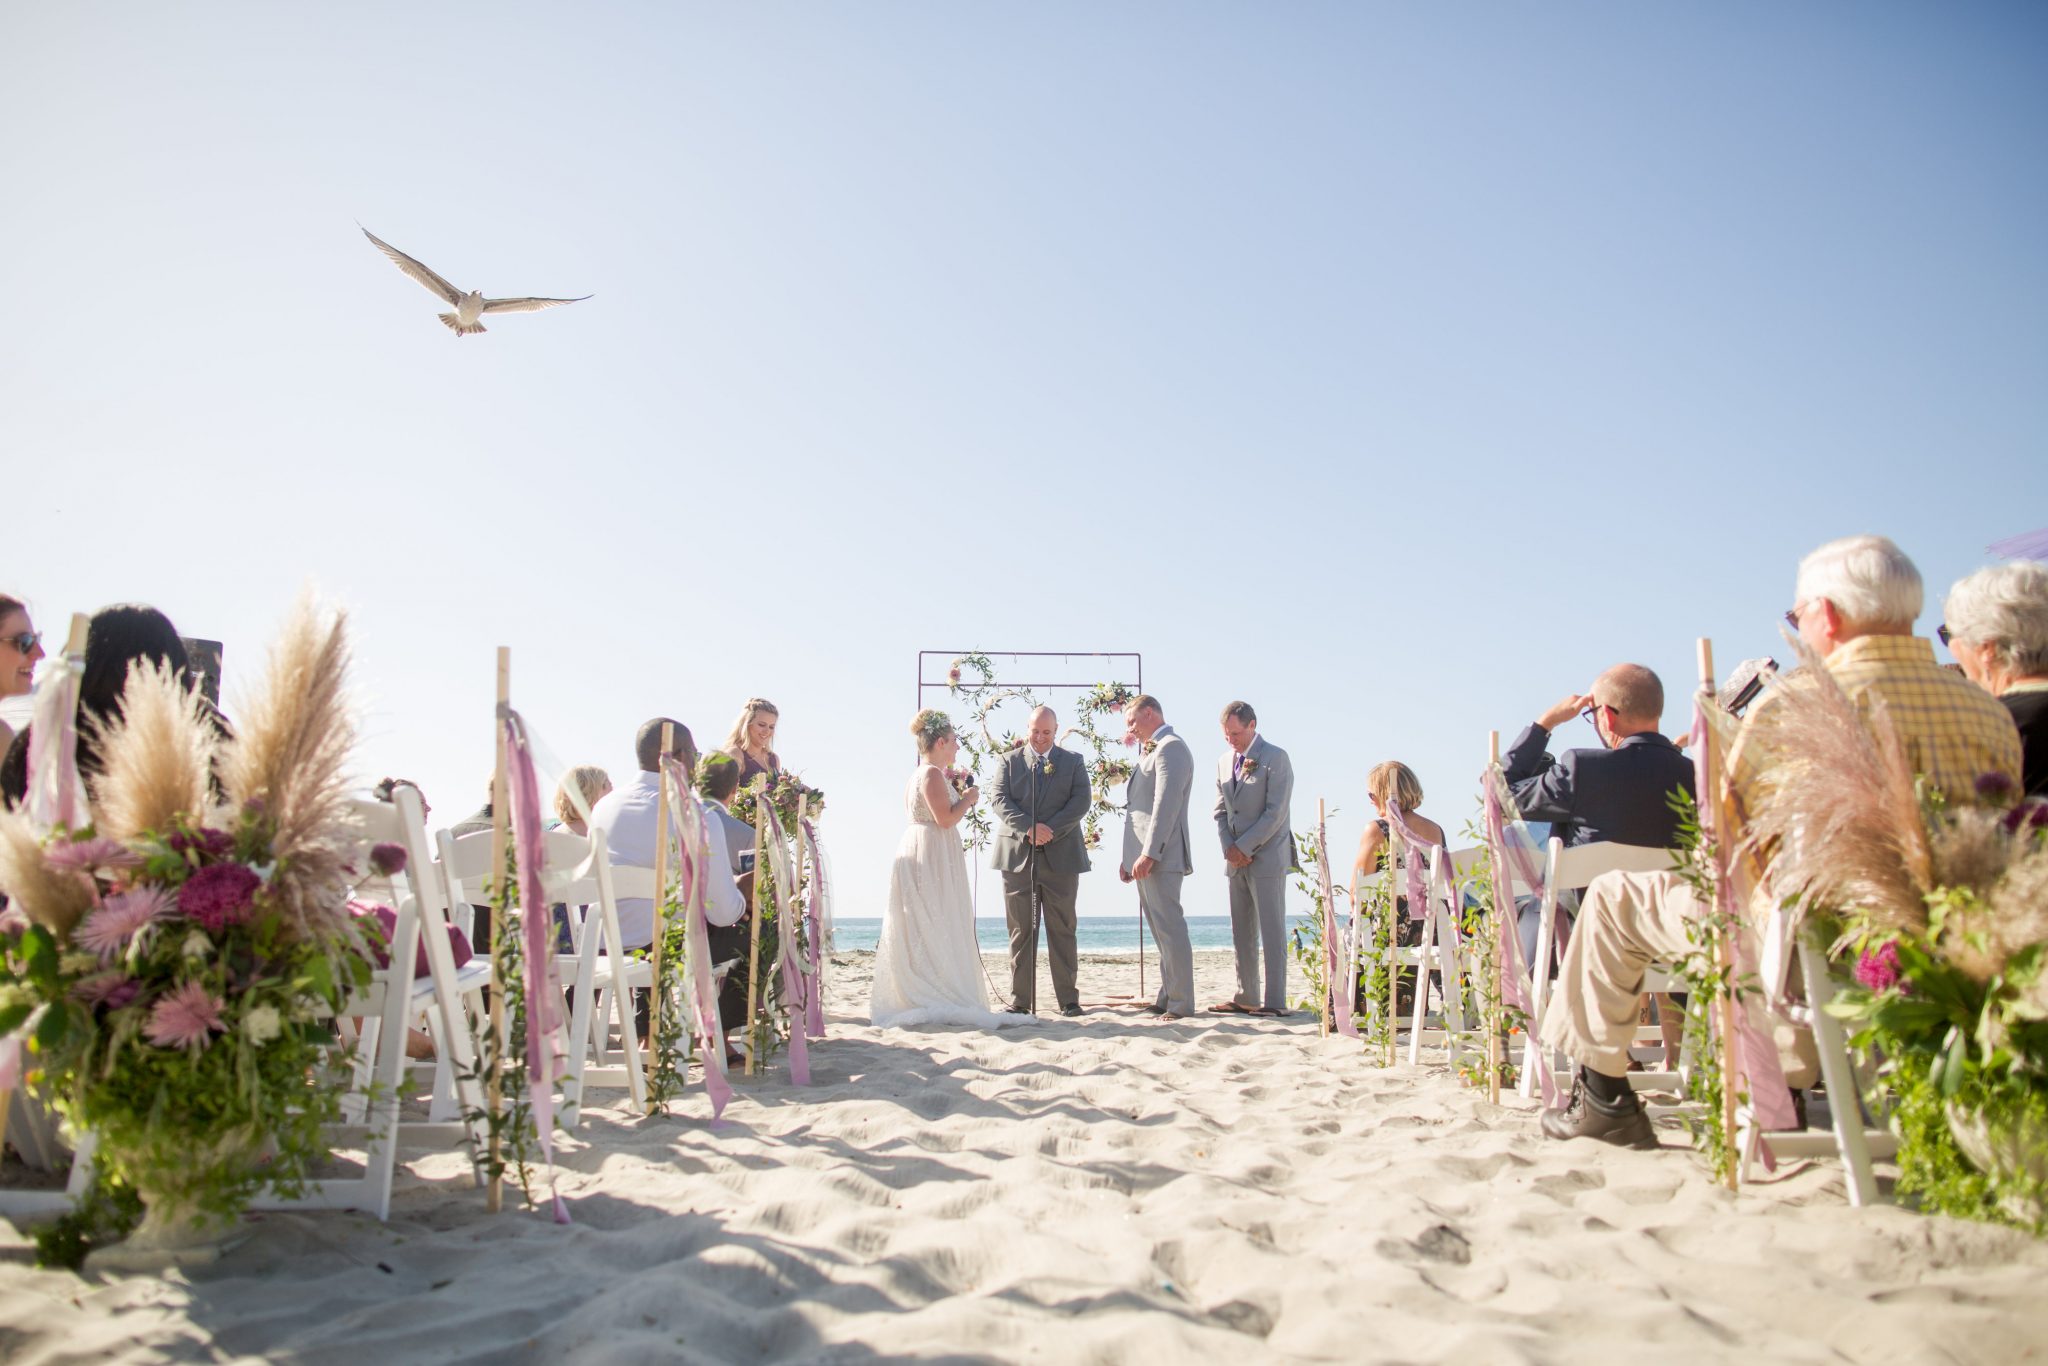 Heather and Max during their beach wedding ceremony